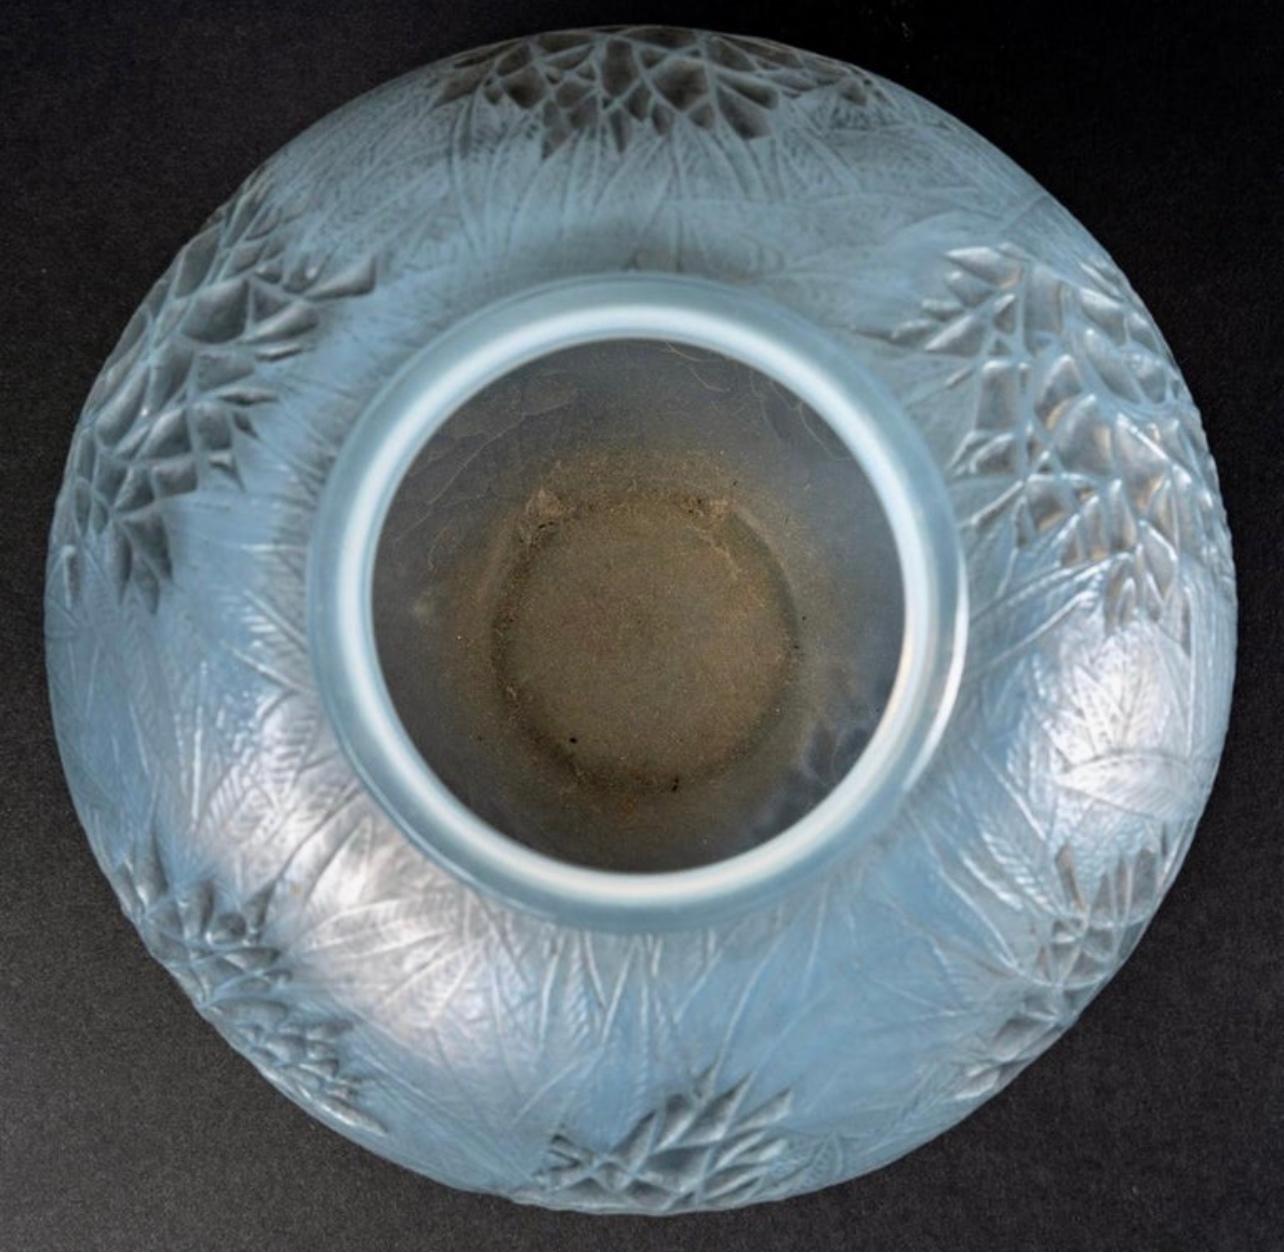 French 1923 René Lalique Vase Esterel Cased Opalescent Glass with Grey Patina